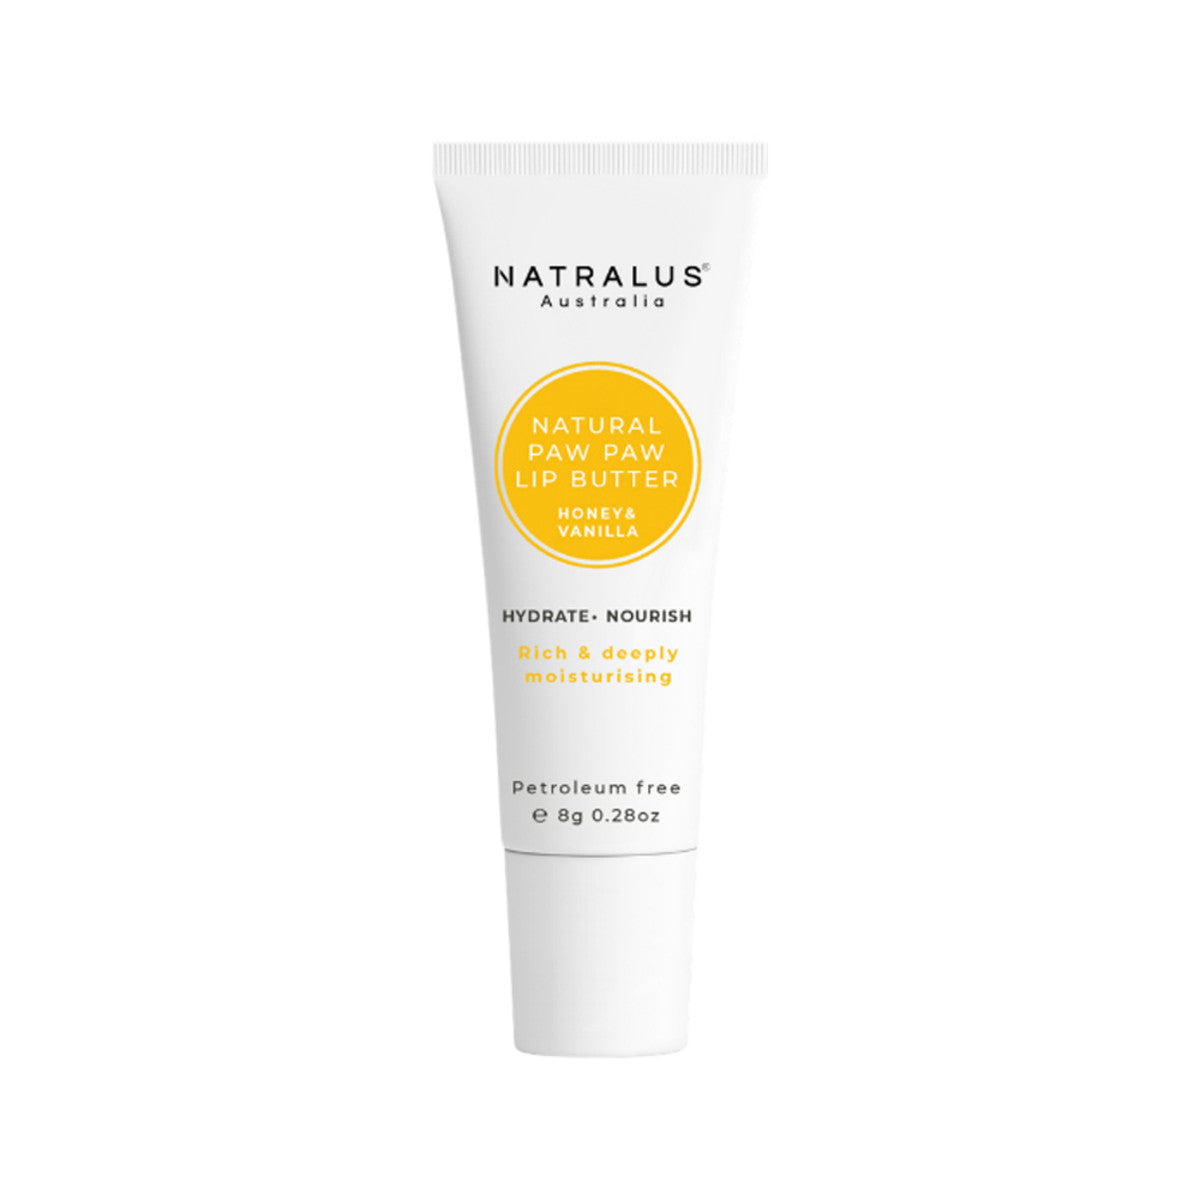 Natralus - Natural Paw Paw Lip Butter Honey and Vanilla